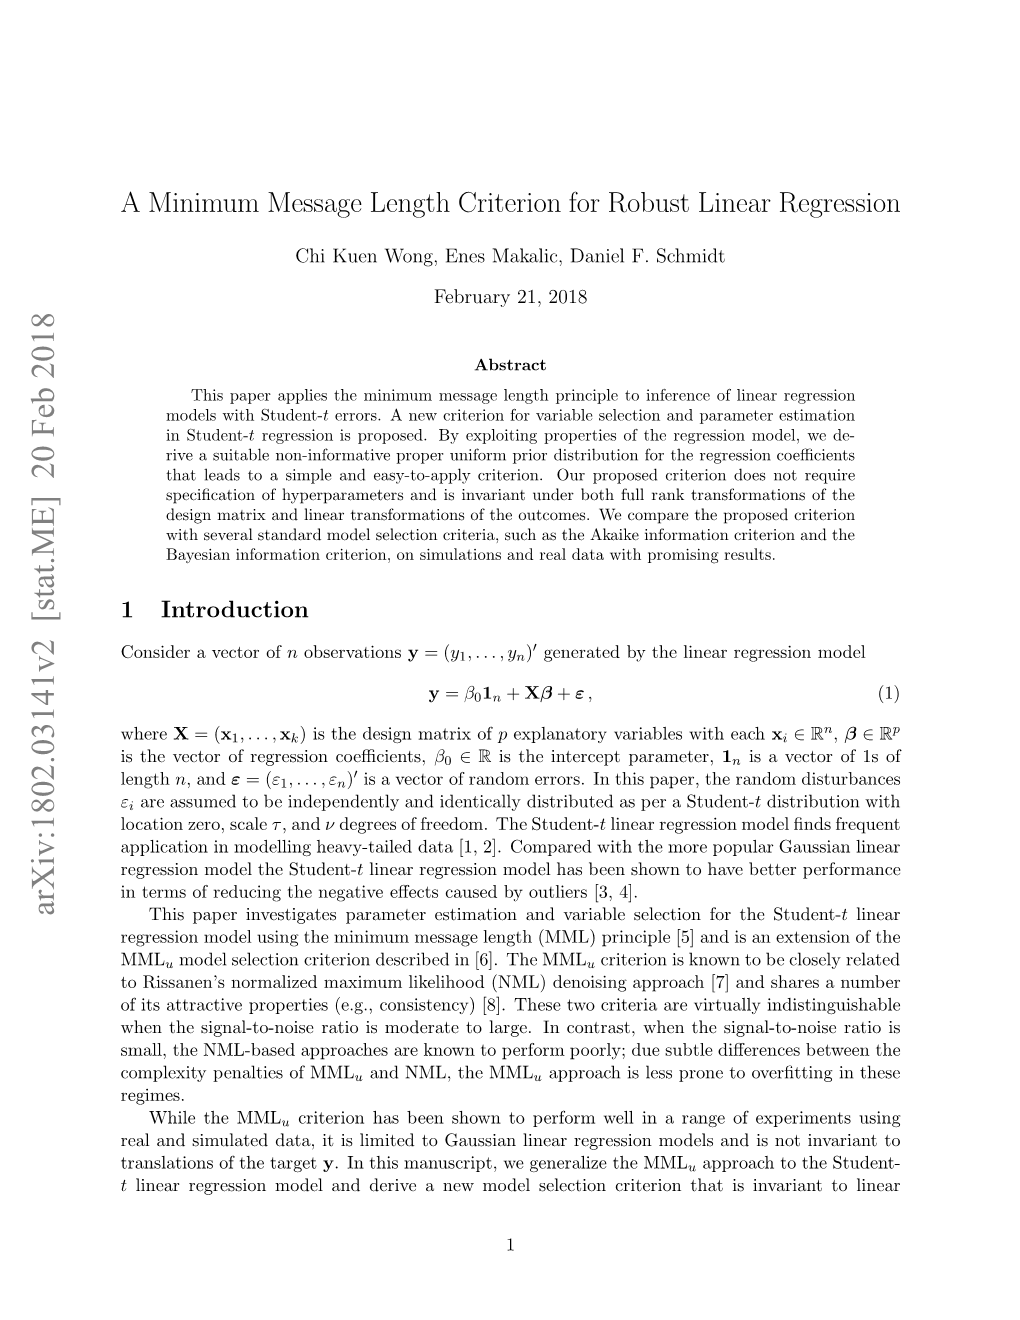 A Minimum Message Length Criterion for Robust Linear Regression